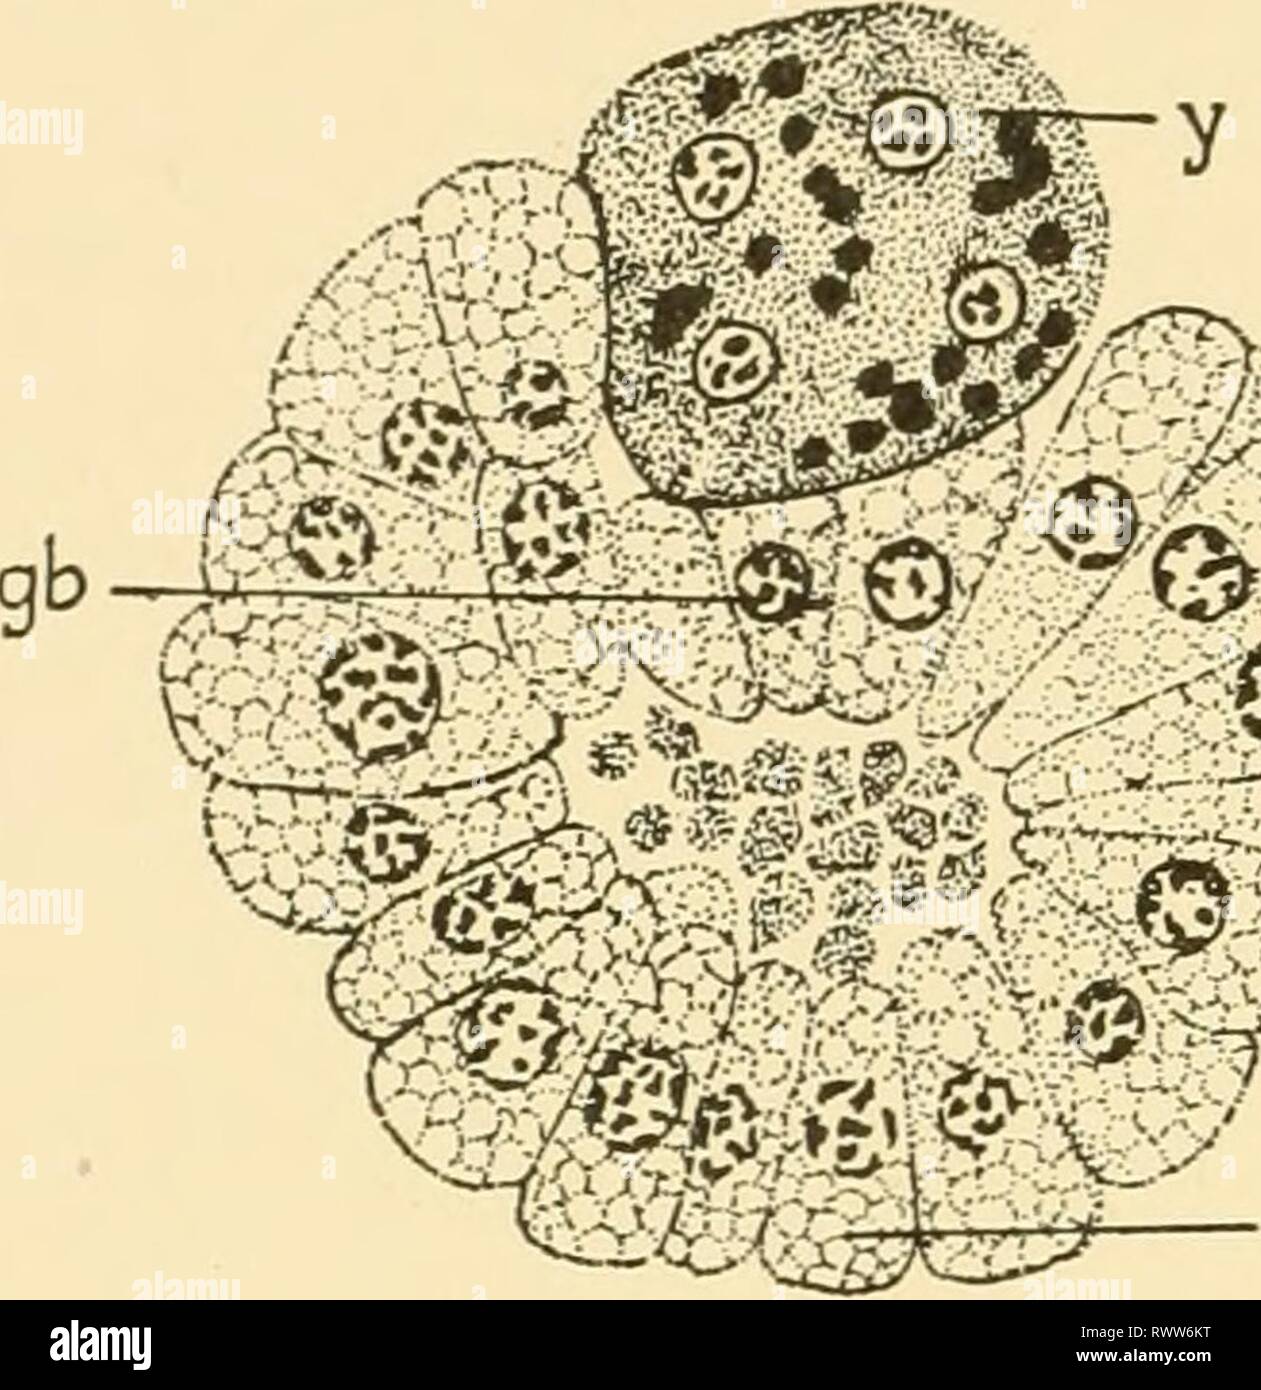 Embryology of insects and myriapods; Embryology of insects and myriapods; the developmental history of insects, centipedes, and millepedes from egg desposition [!] to hatching embryologyofinse00joha Year: 1941  290 EMBRYOLOGY OF INSECTS AND MYRIAPODS becomes the embryonic rudiment; the other layer, the envelope. This pecuHar condition, where the yolk, instead of lying inside the vesicle formed by the primary epithelium (blastoderm) comes to lie outside of it, was first described by Brues (1903) for Xenos peckii. Stock Photo